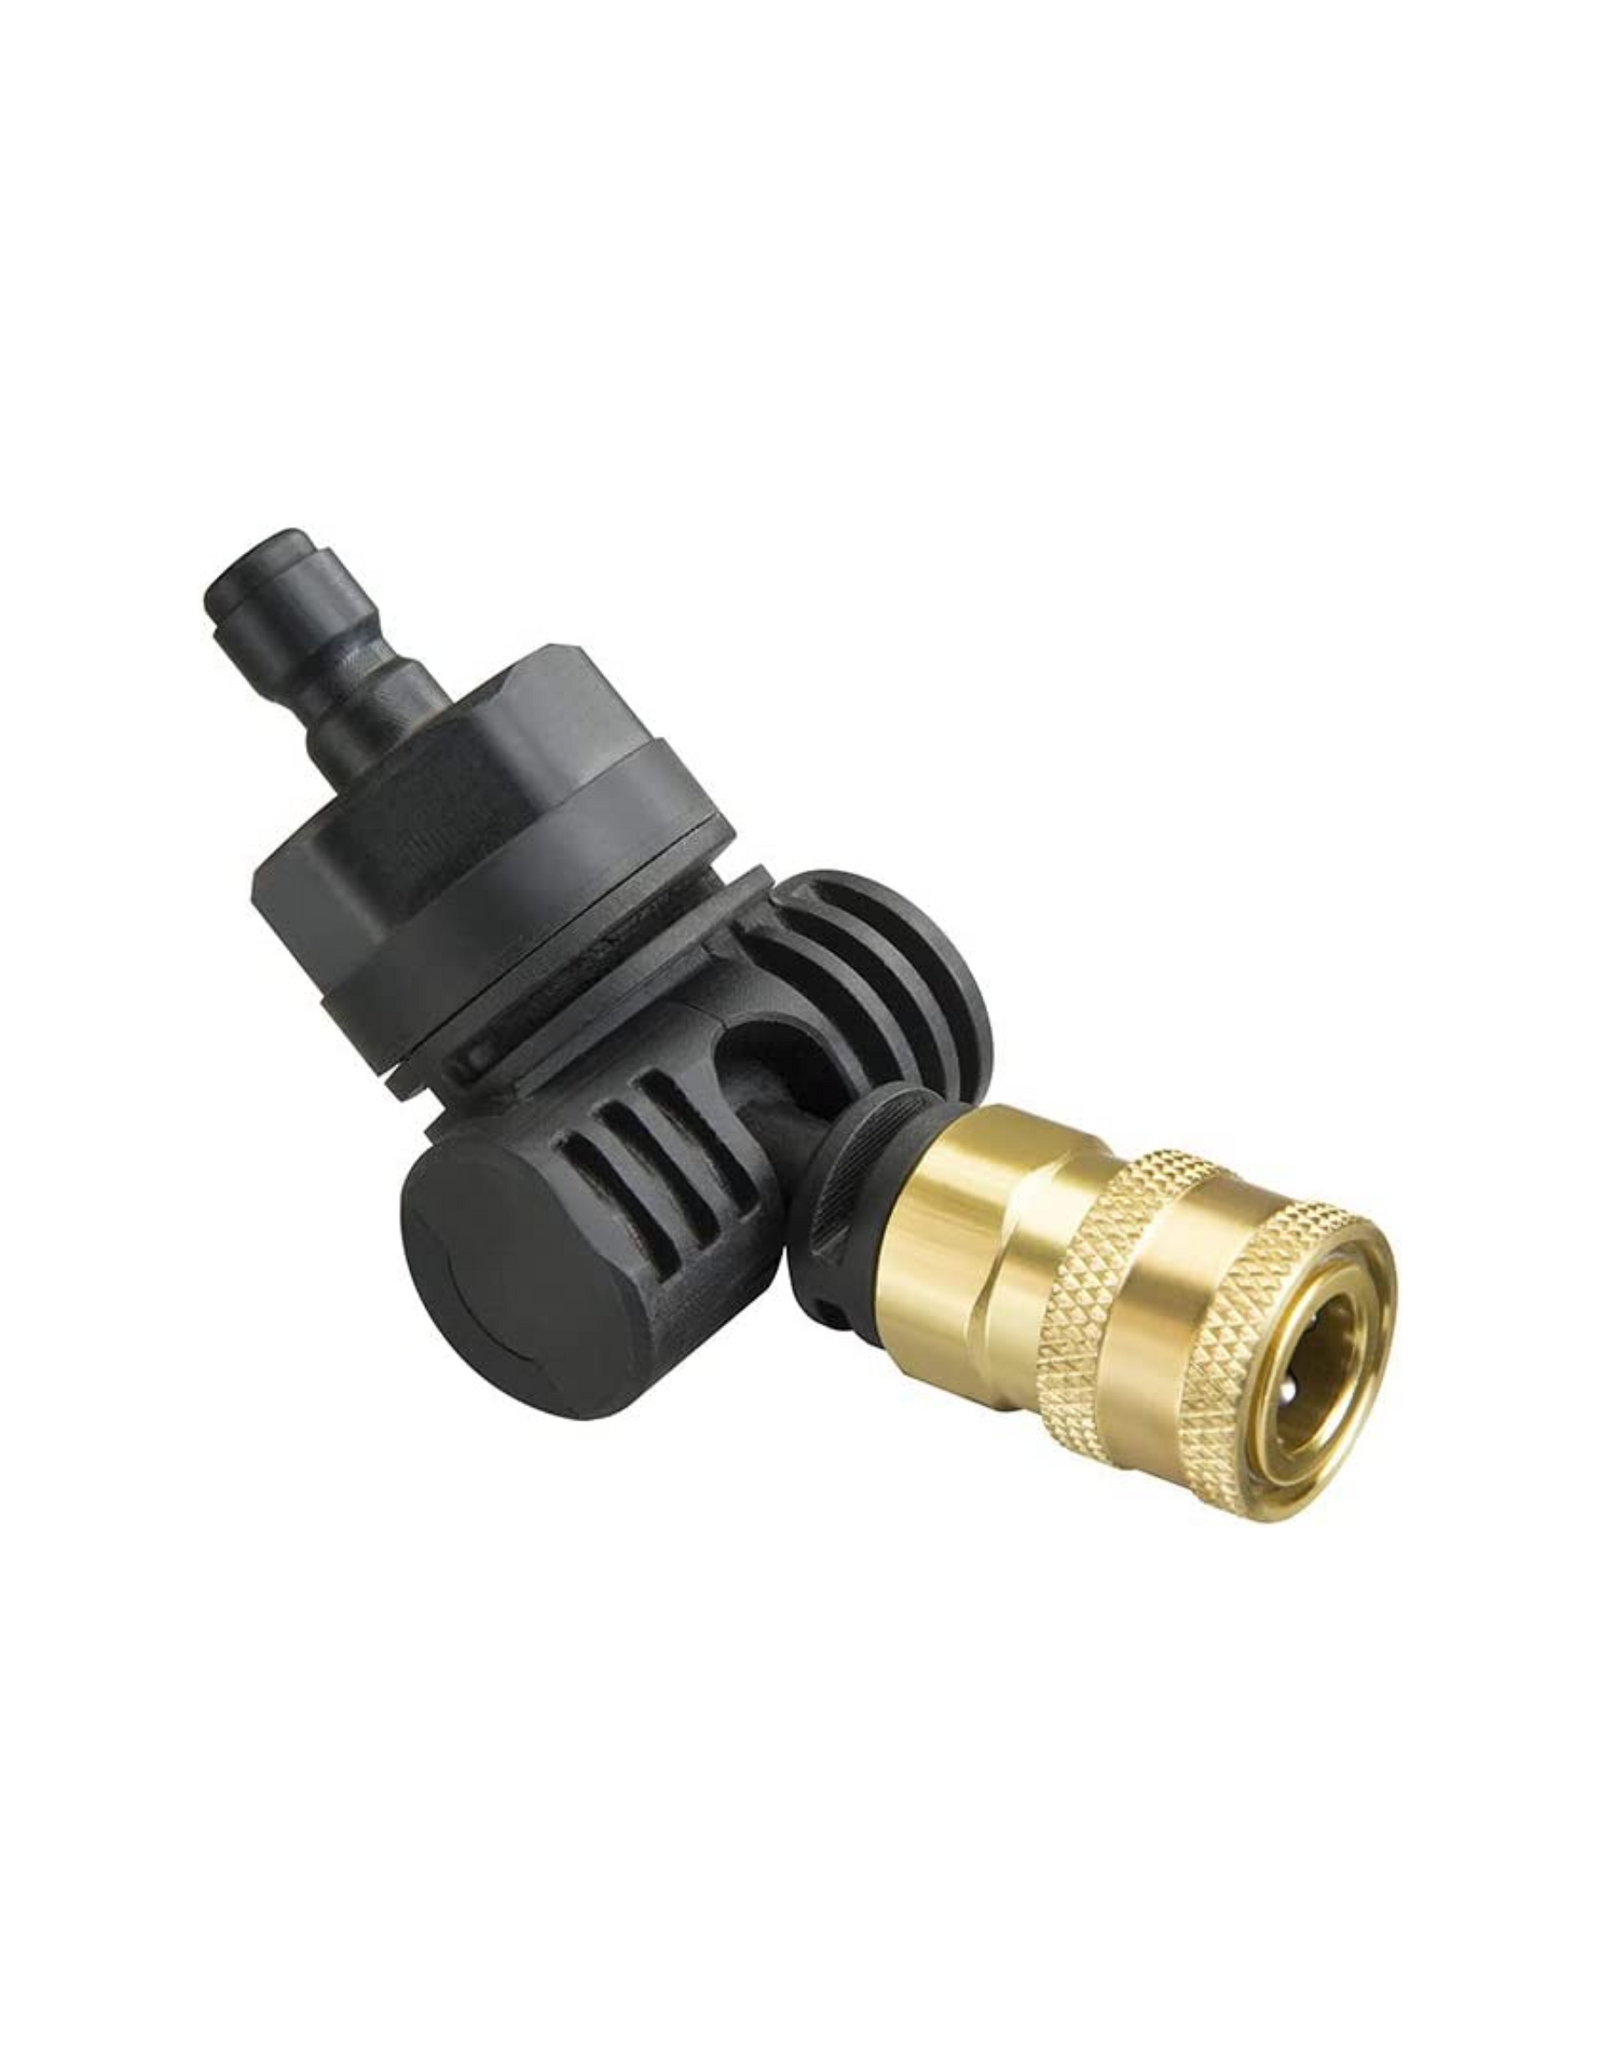 WORX Pivoting Quick-Connect Adapter, Nozzle Up To 180° In Any Direction